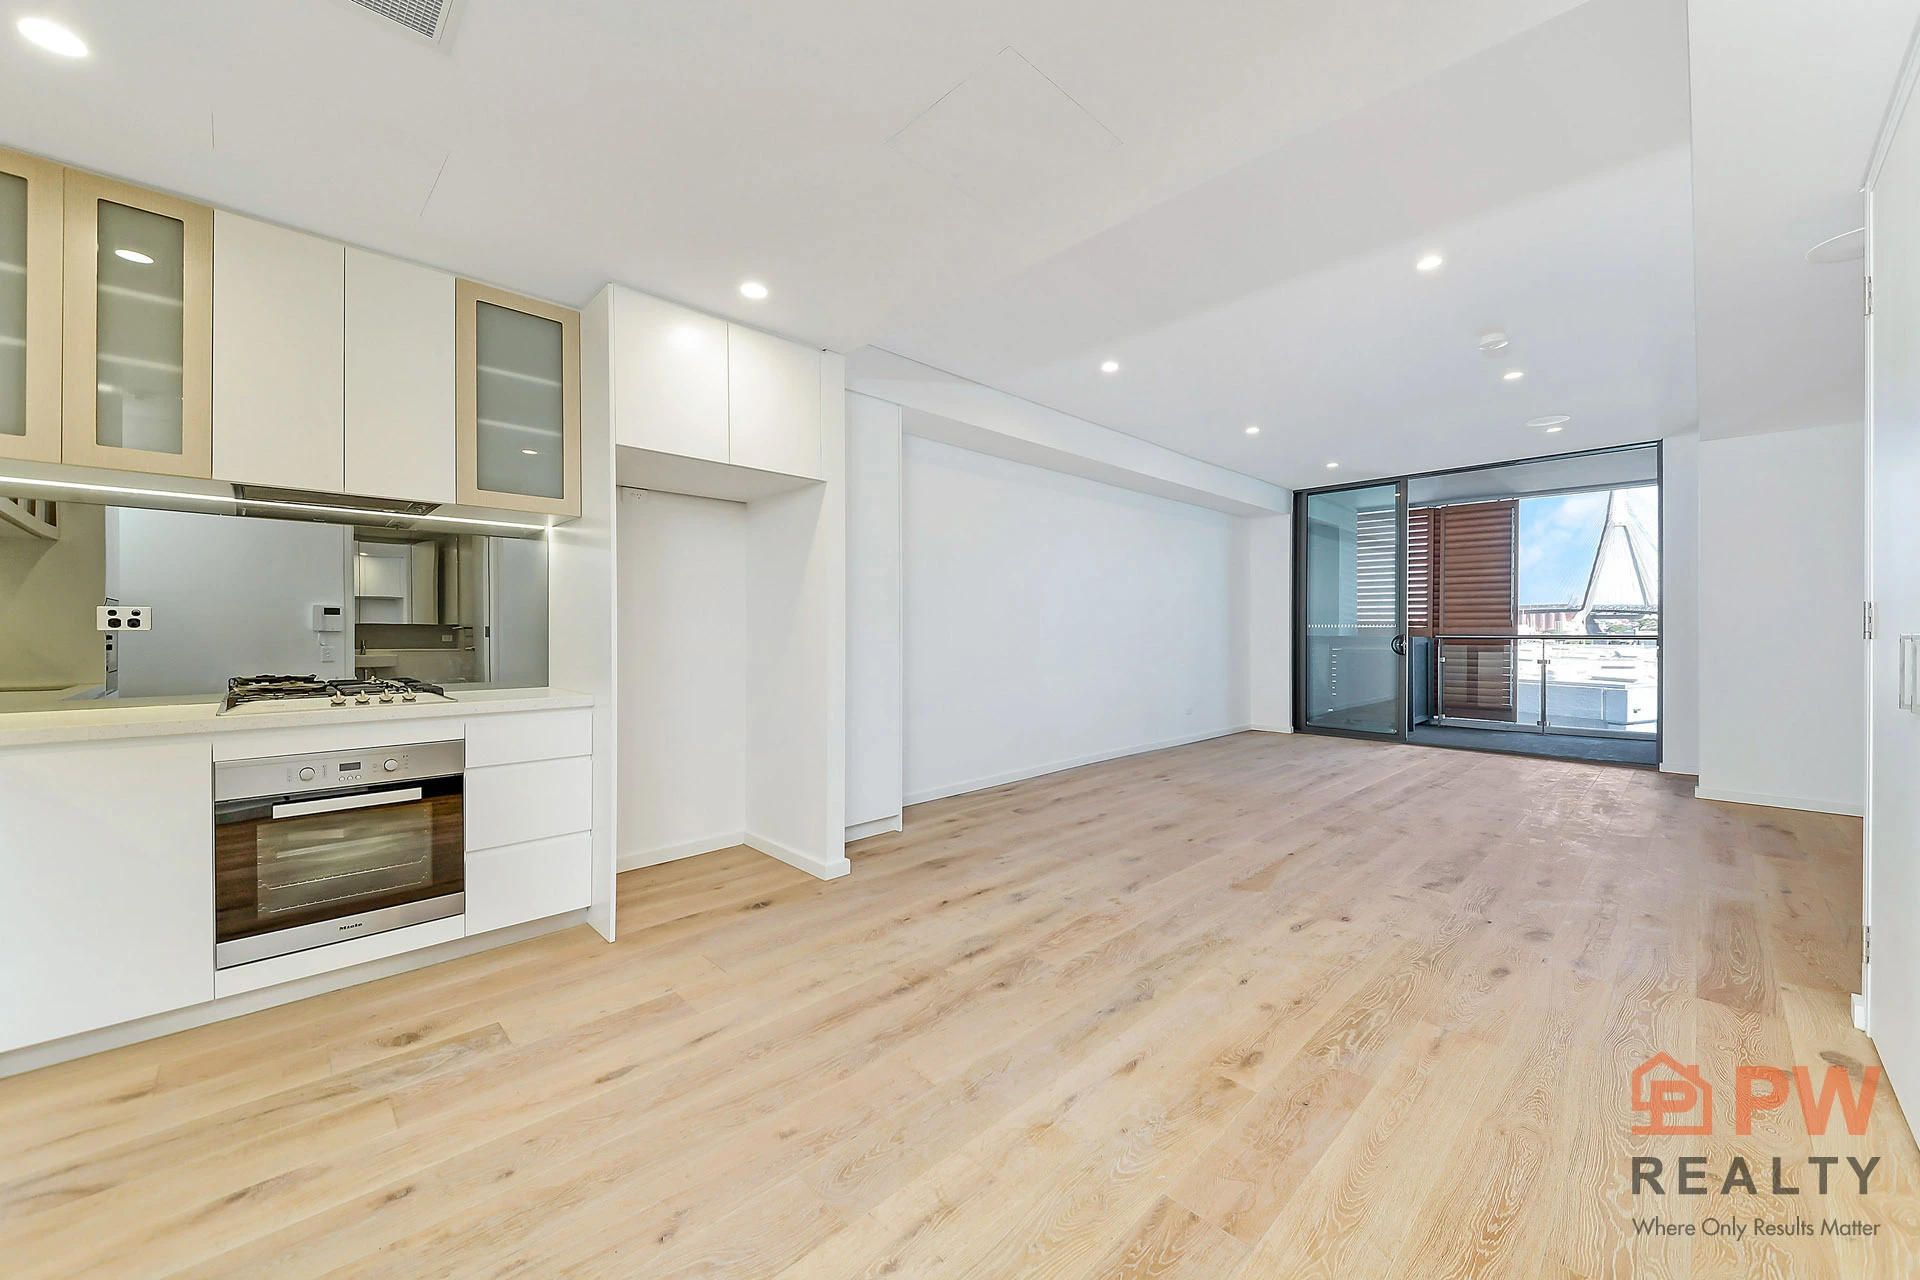 Brand new 2 bedroom apartment in the heart of Sydney